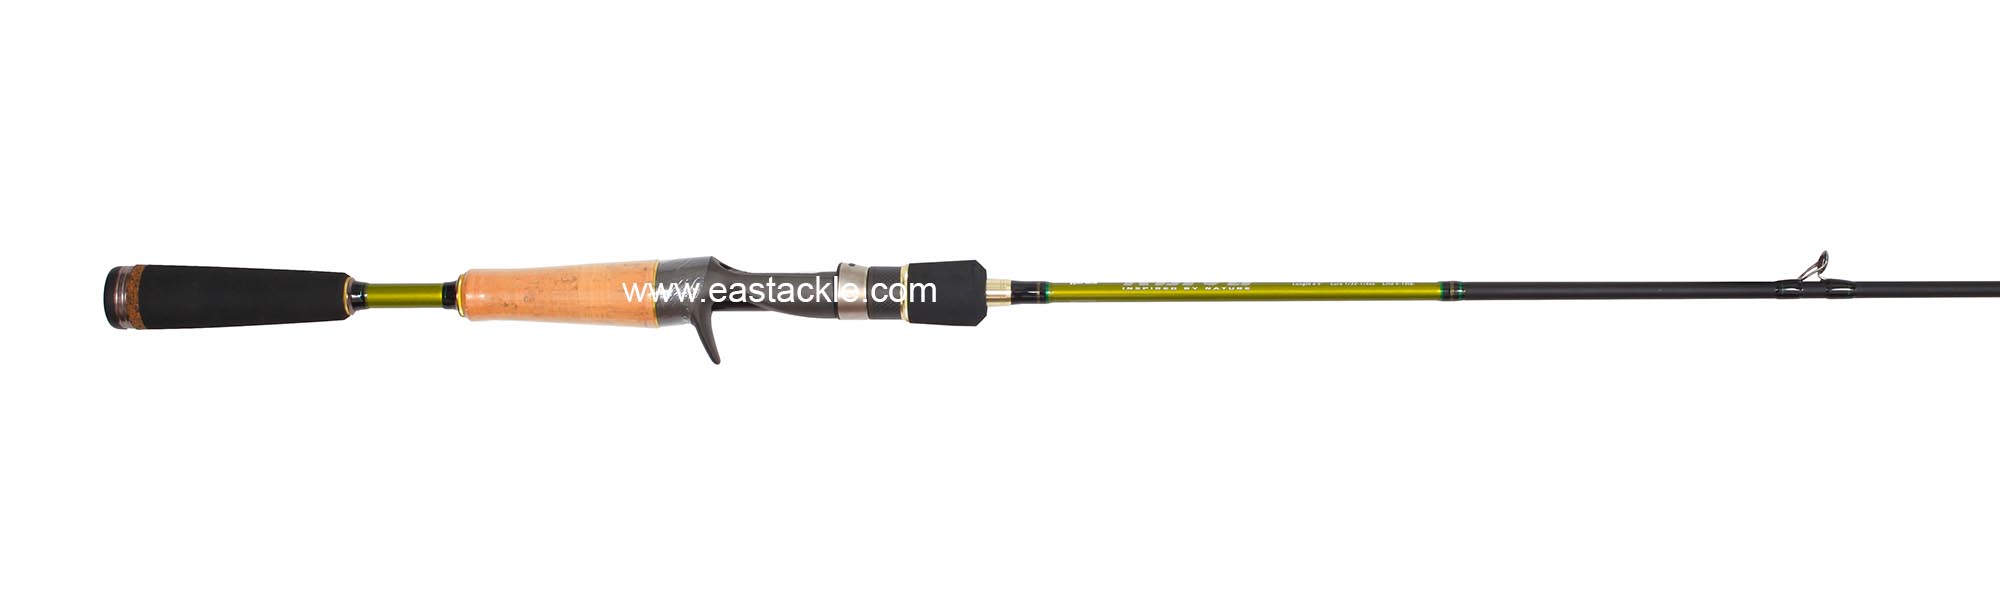 Rapala - Koivu - KVC651ML - Bait Casting Rod - Butt to Stripper Guide (Side View) | Eastackle